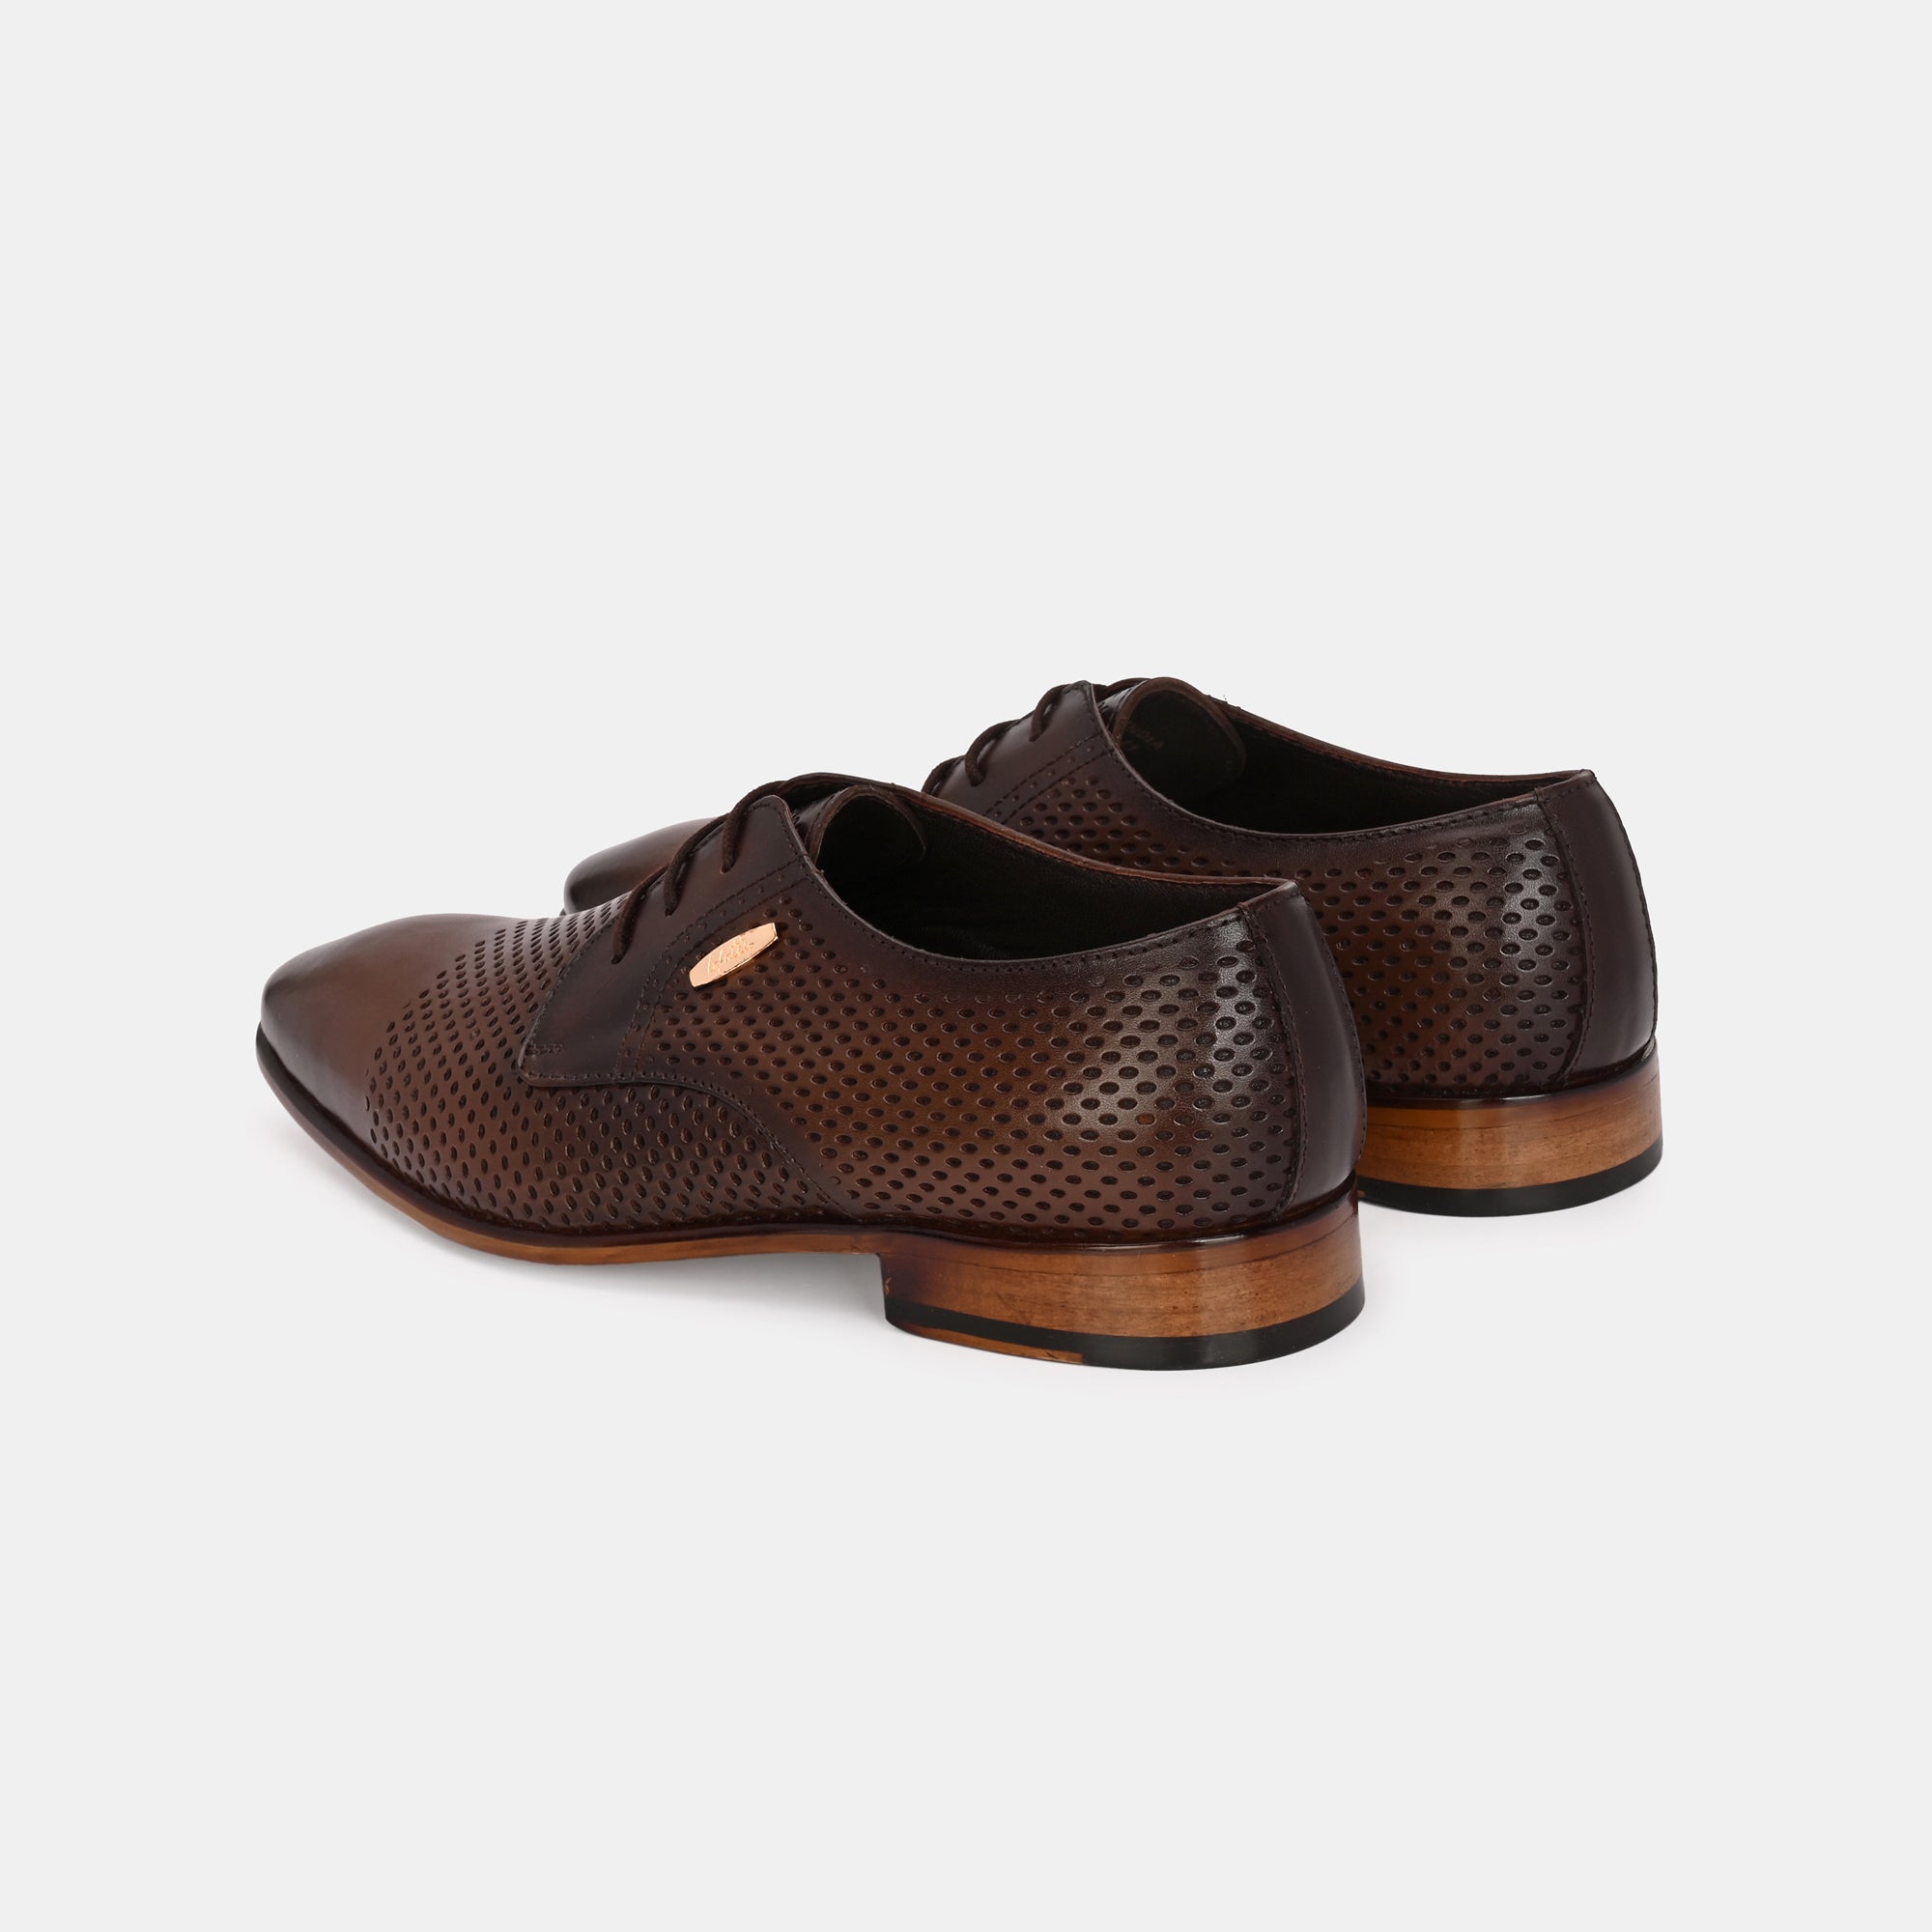 Brown Perforated Lace-Up Shoes by Lafattio